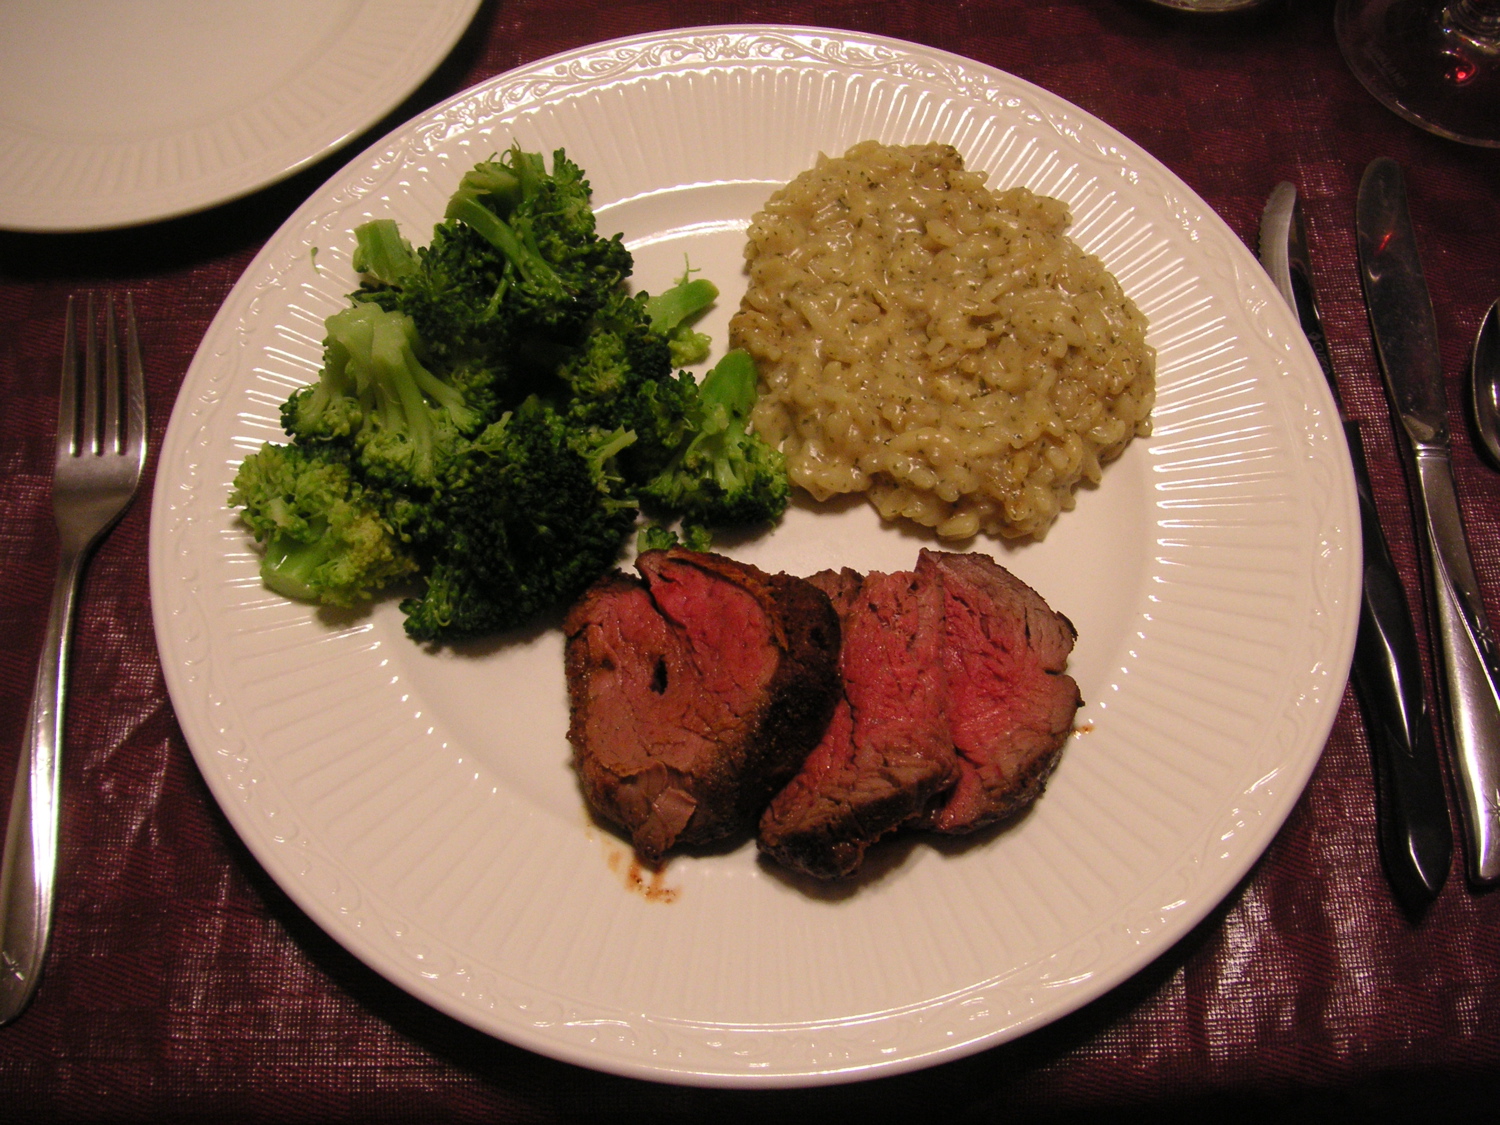 a plate that has some meat and broccoli on it